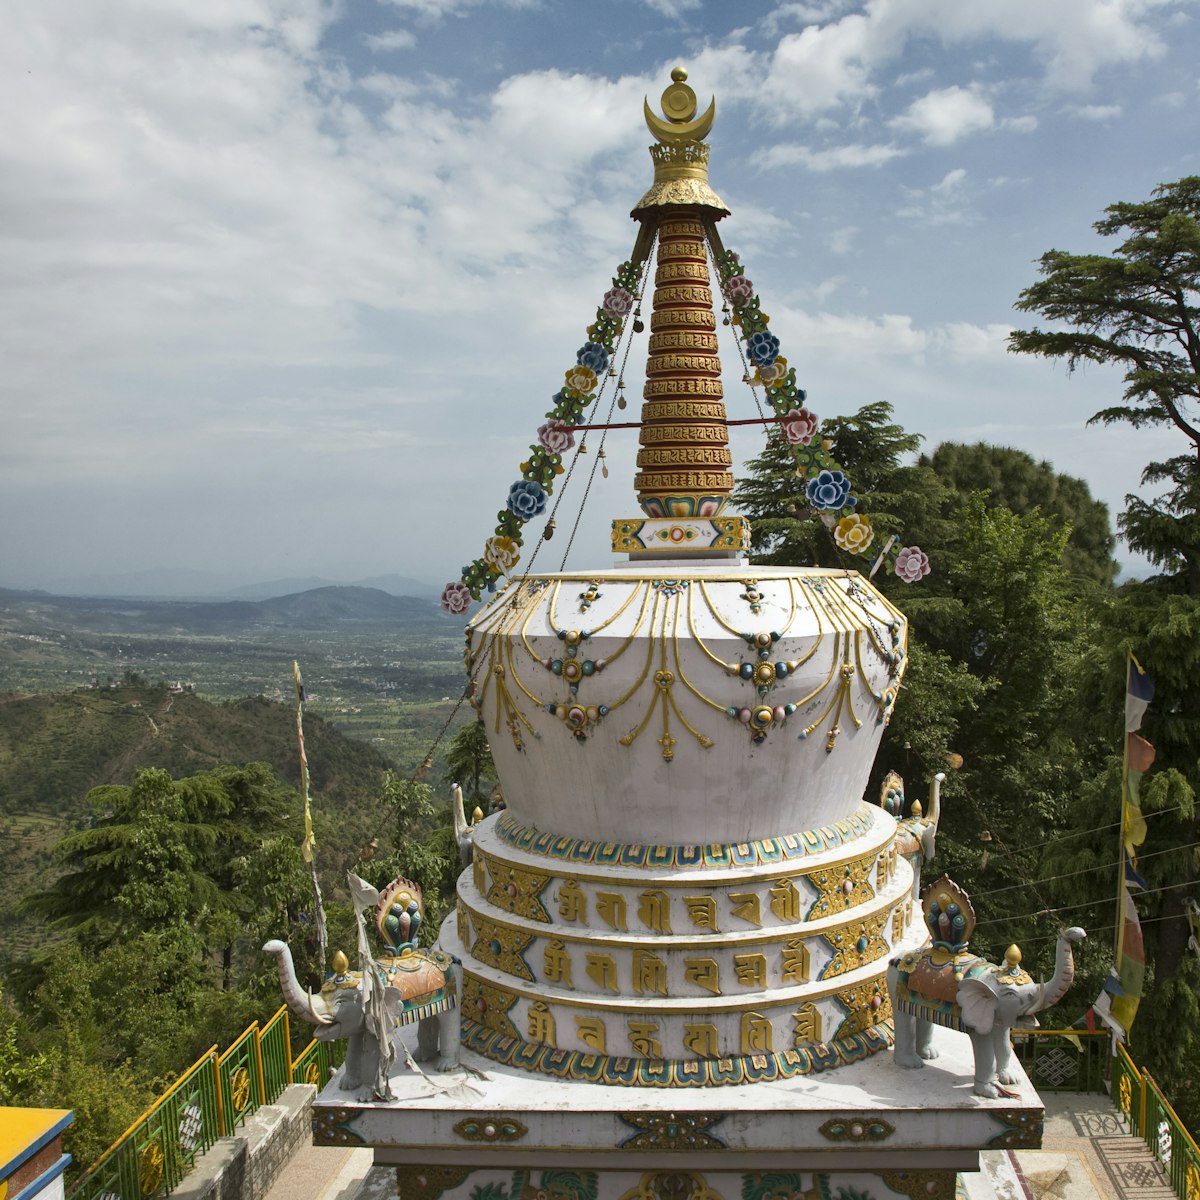 A Tibetan Stupa On The Grounds Of The Tsuglagkhang Complex Which Is The Dalai Lamas Residence In Exile In Mcleod Gang, Dharmsala, India. (Photo By: Education Images/UIG via Getty Images)